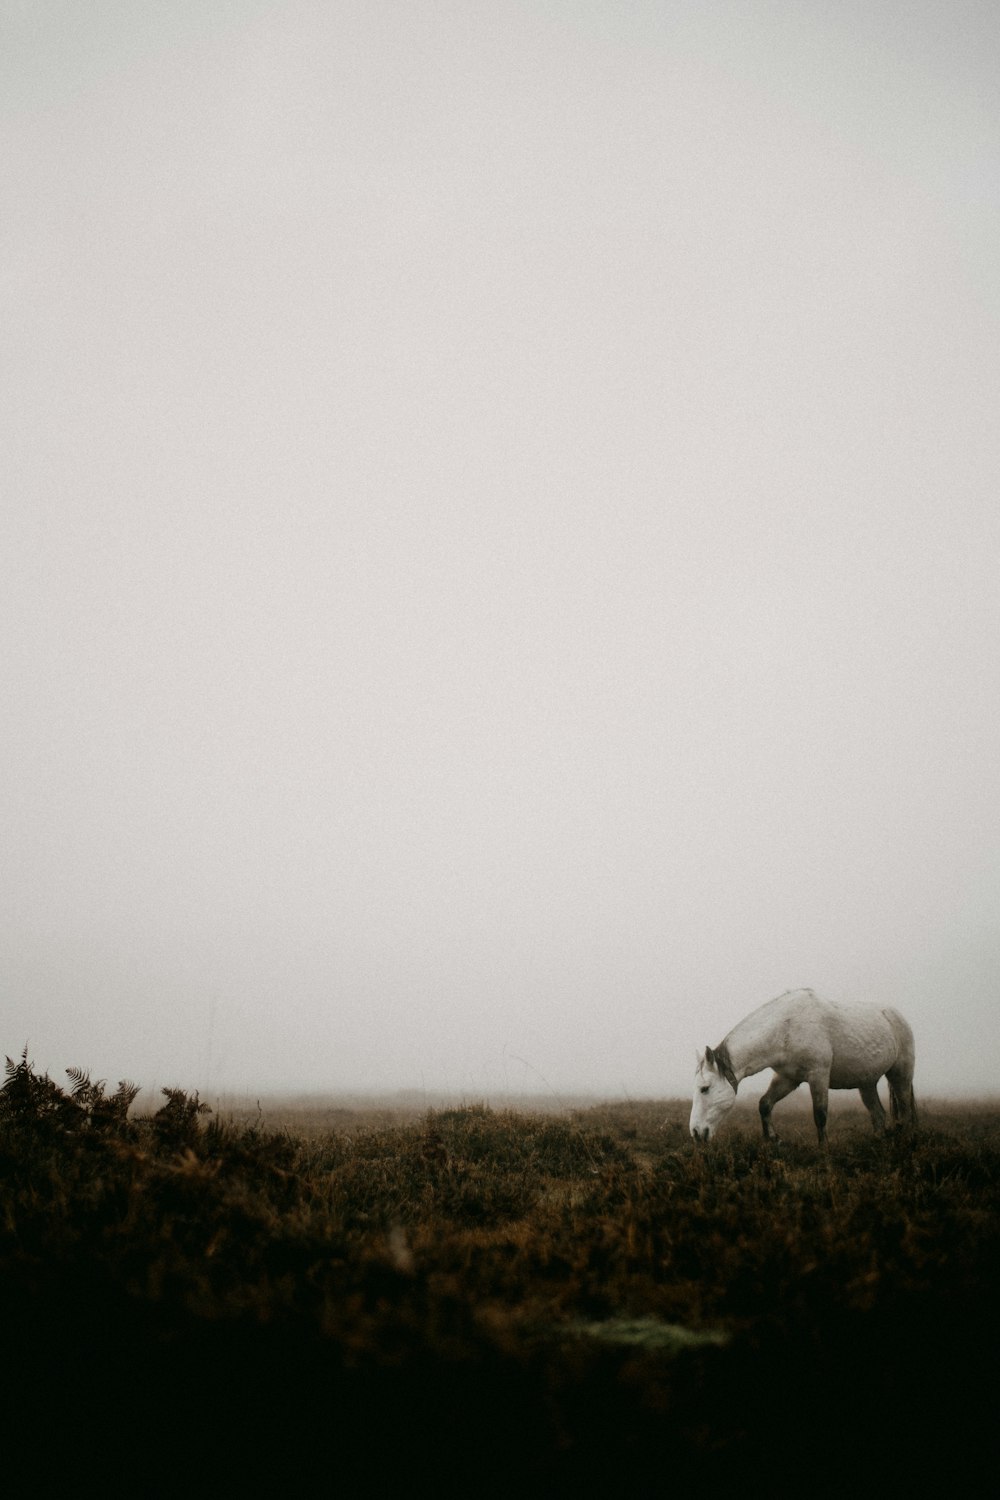 two horses grazing in a field on a foggy day